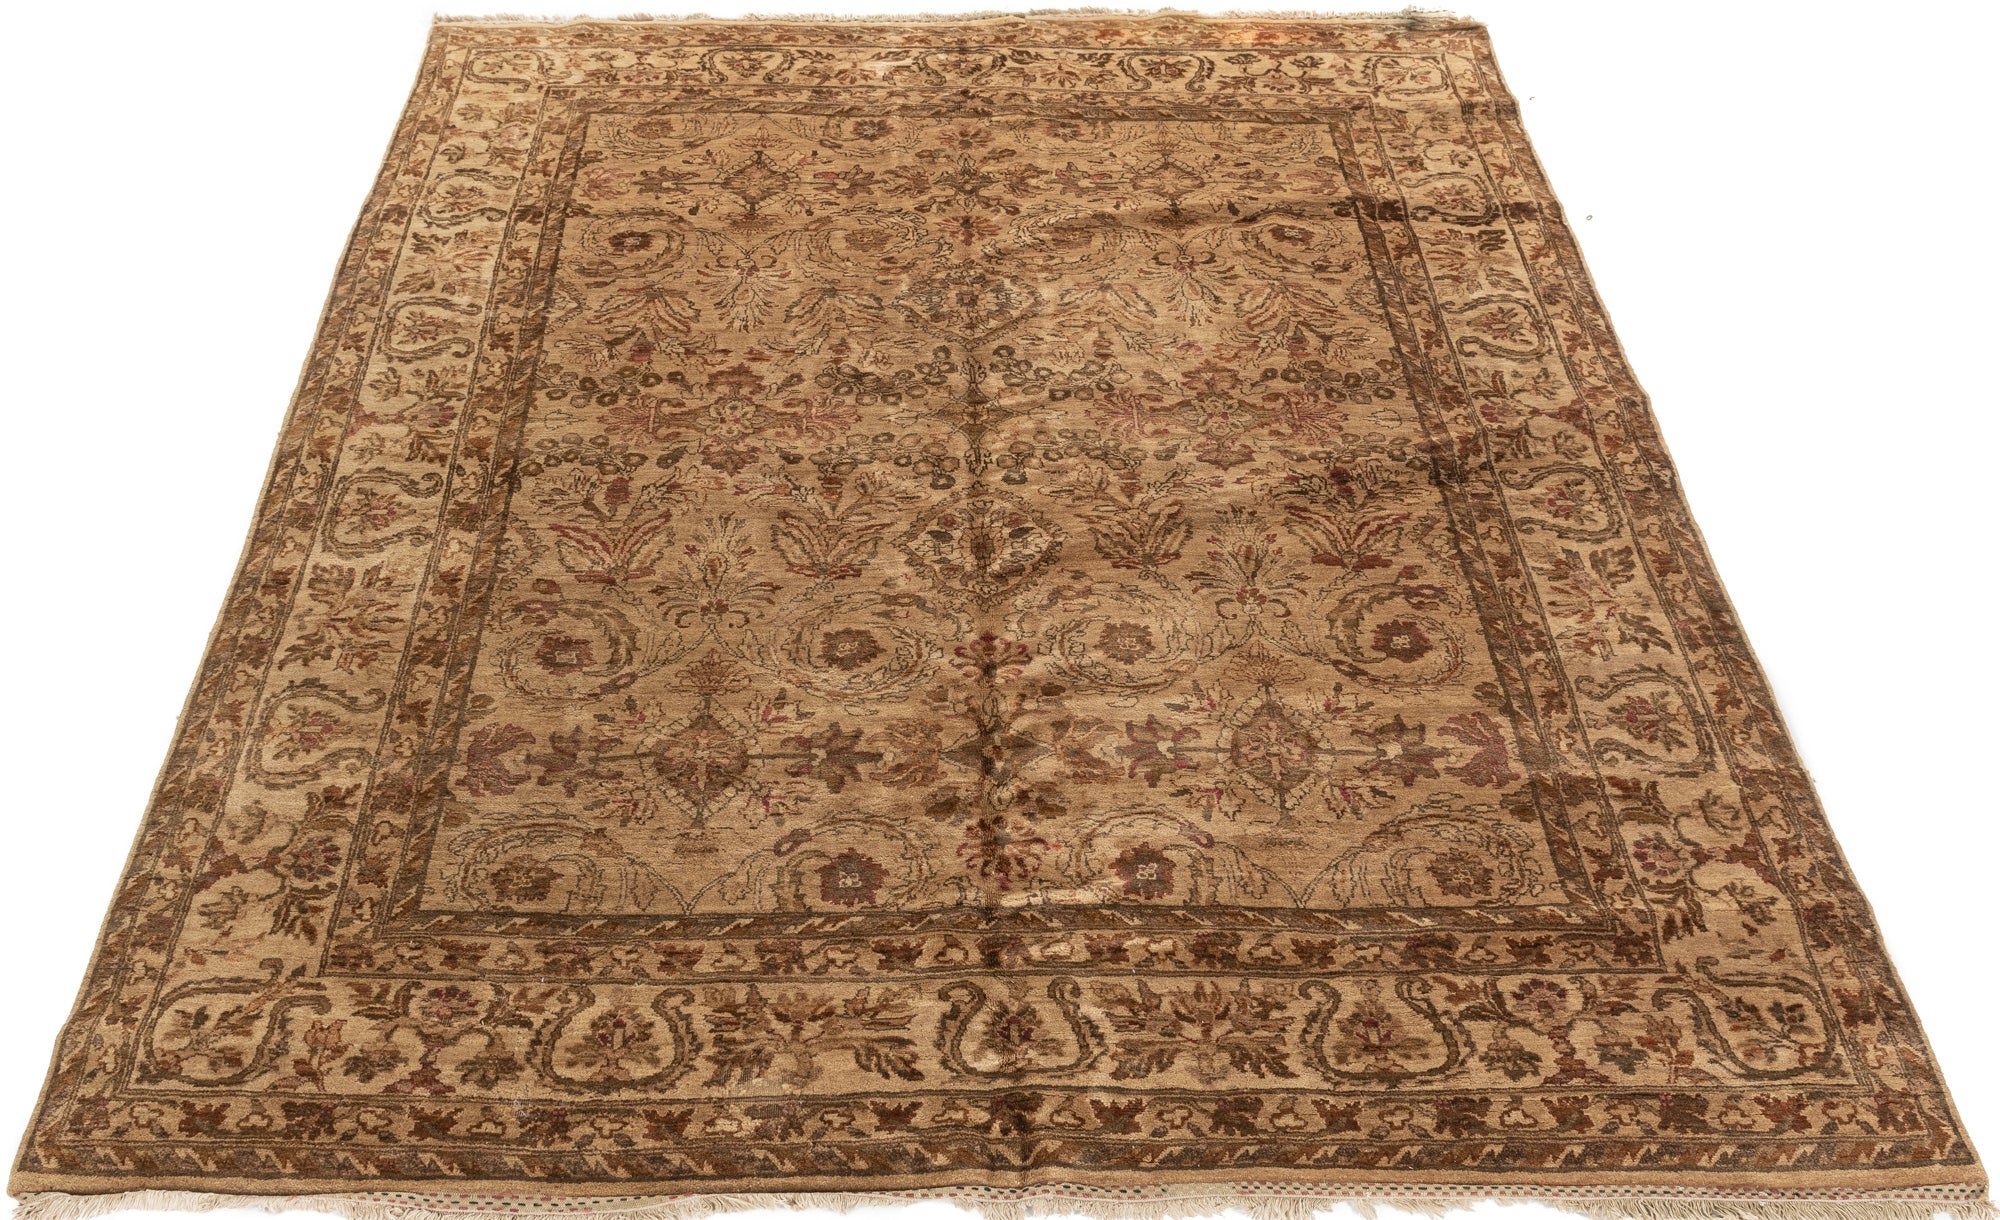 New Transitional Room Size Wool Rug Hand-Woven with a Cotton Foundation Rug <br> 8'3 x 10'0